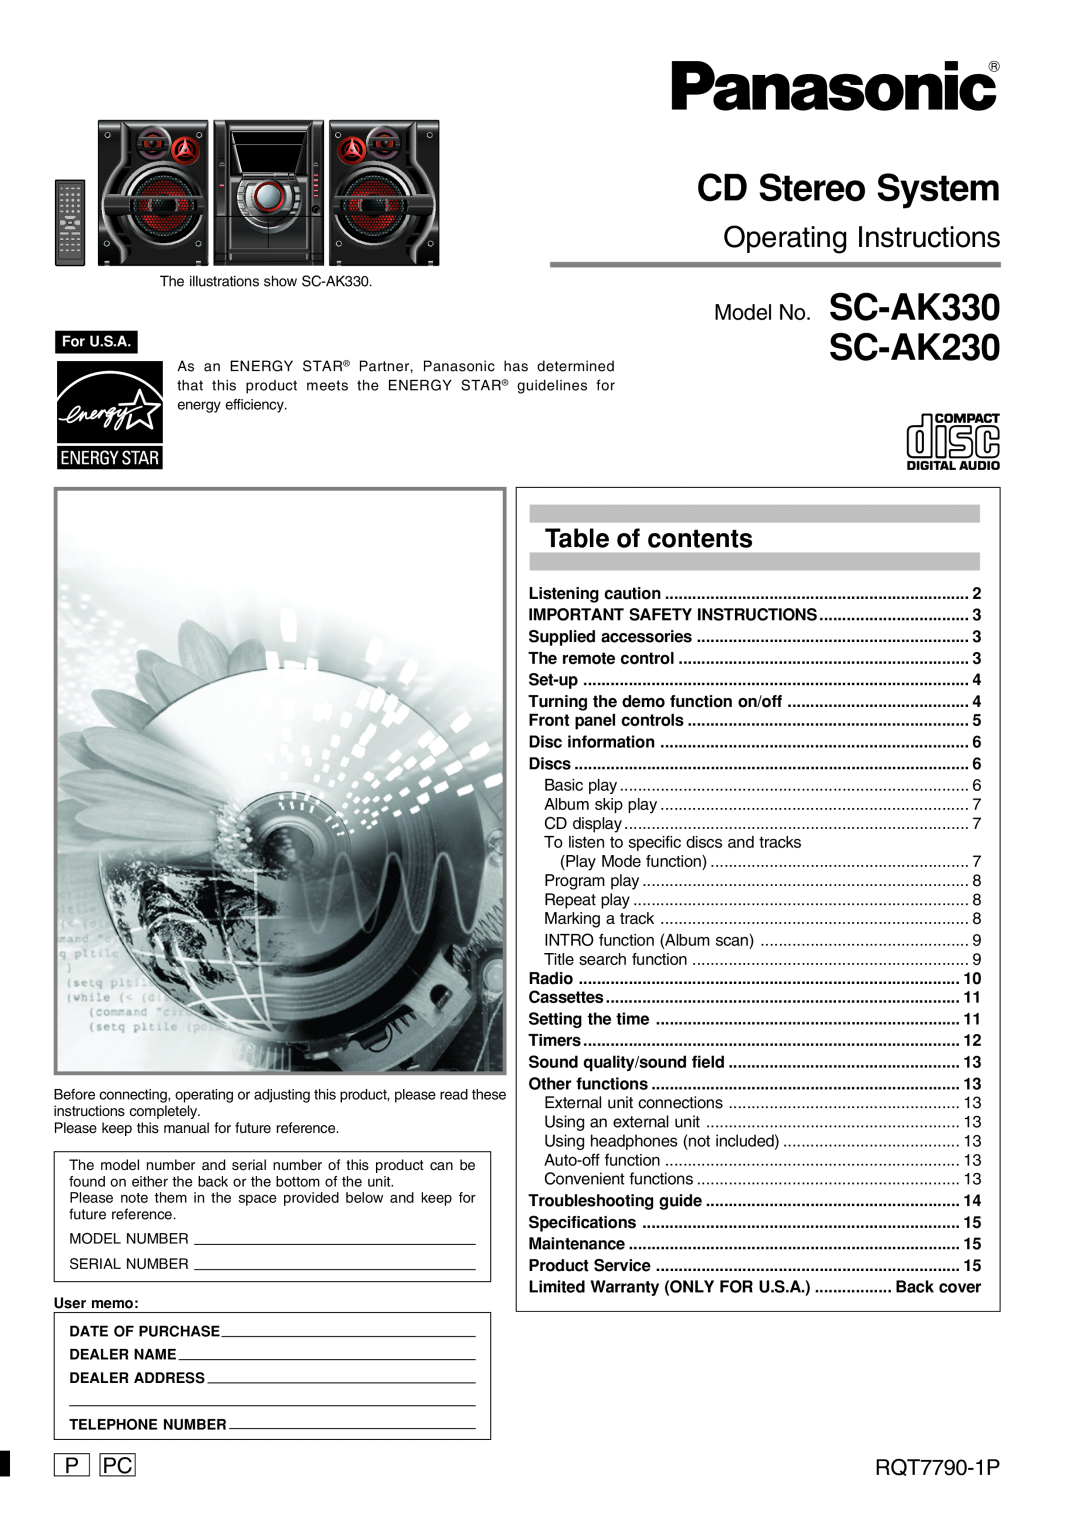 Panasonic important safety instructions Table of contents, Model No. SC-AK330, P Pc, RQT7790-1P, CD Stereo System 